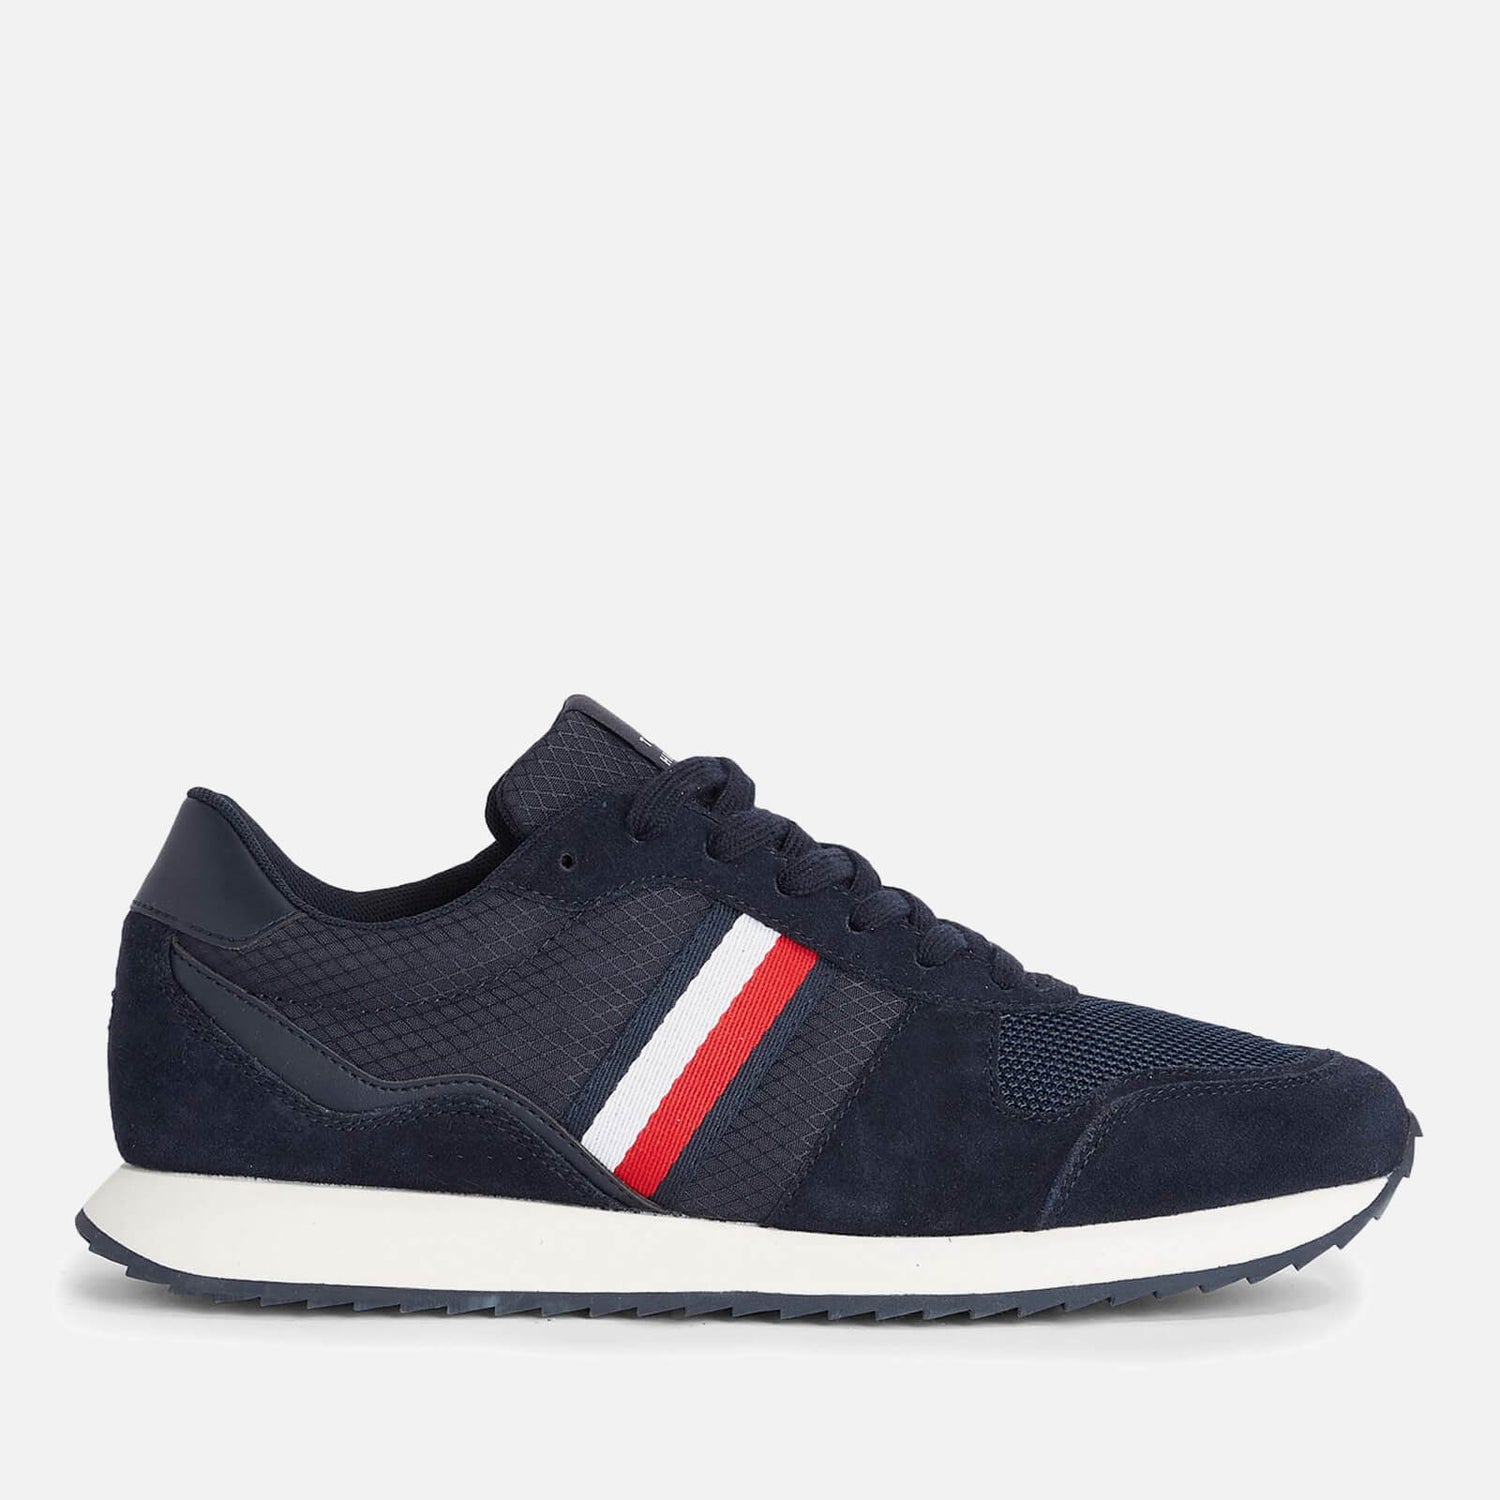 Tommy Hilfiger Men's Evo Mix Suede and Ripstop Trainers - UK 7